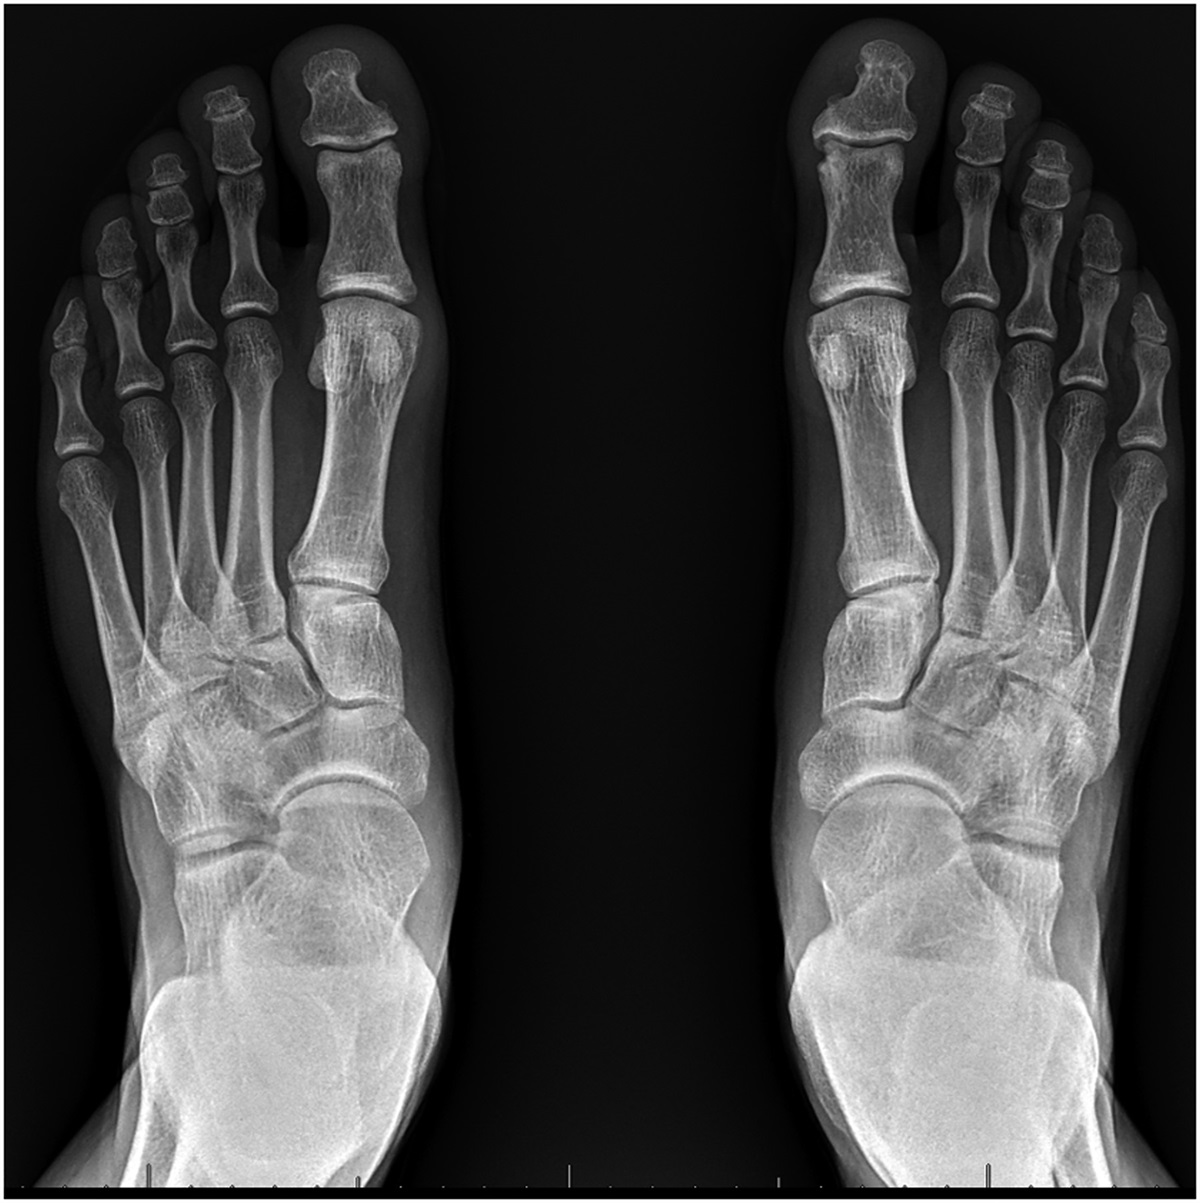 Traumatic rupture of the flexor hallucis brevis tendon. Case report and review of the literature